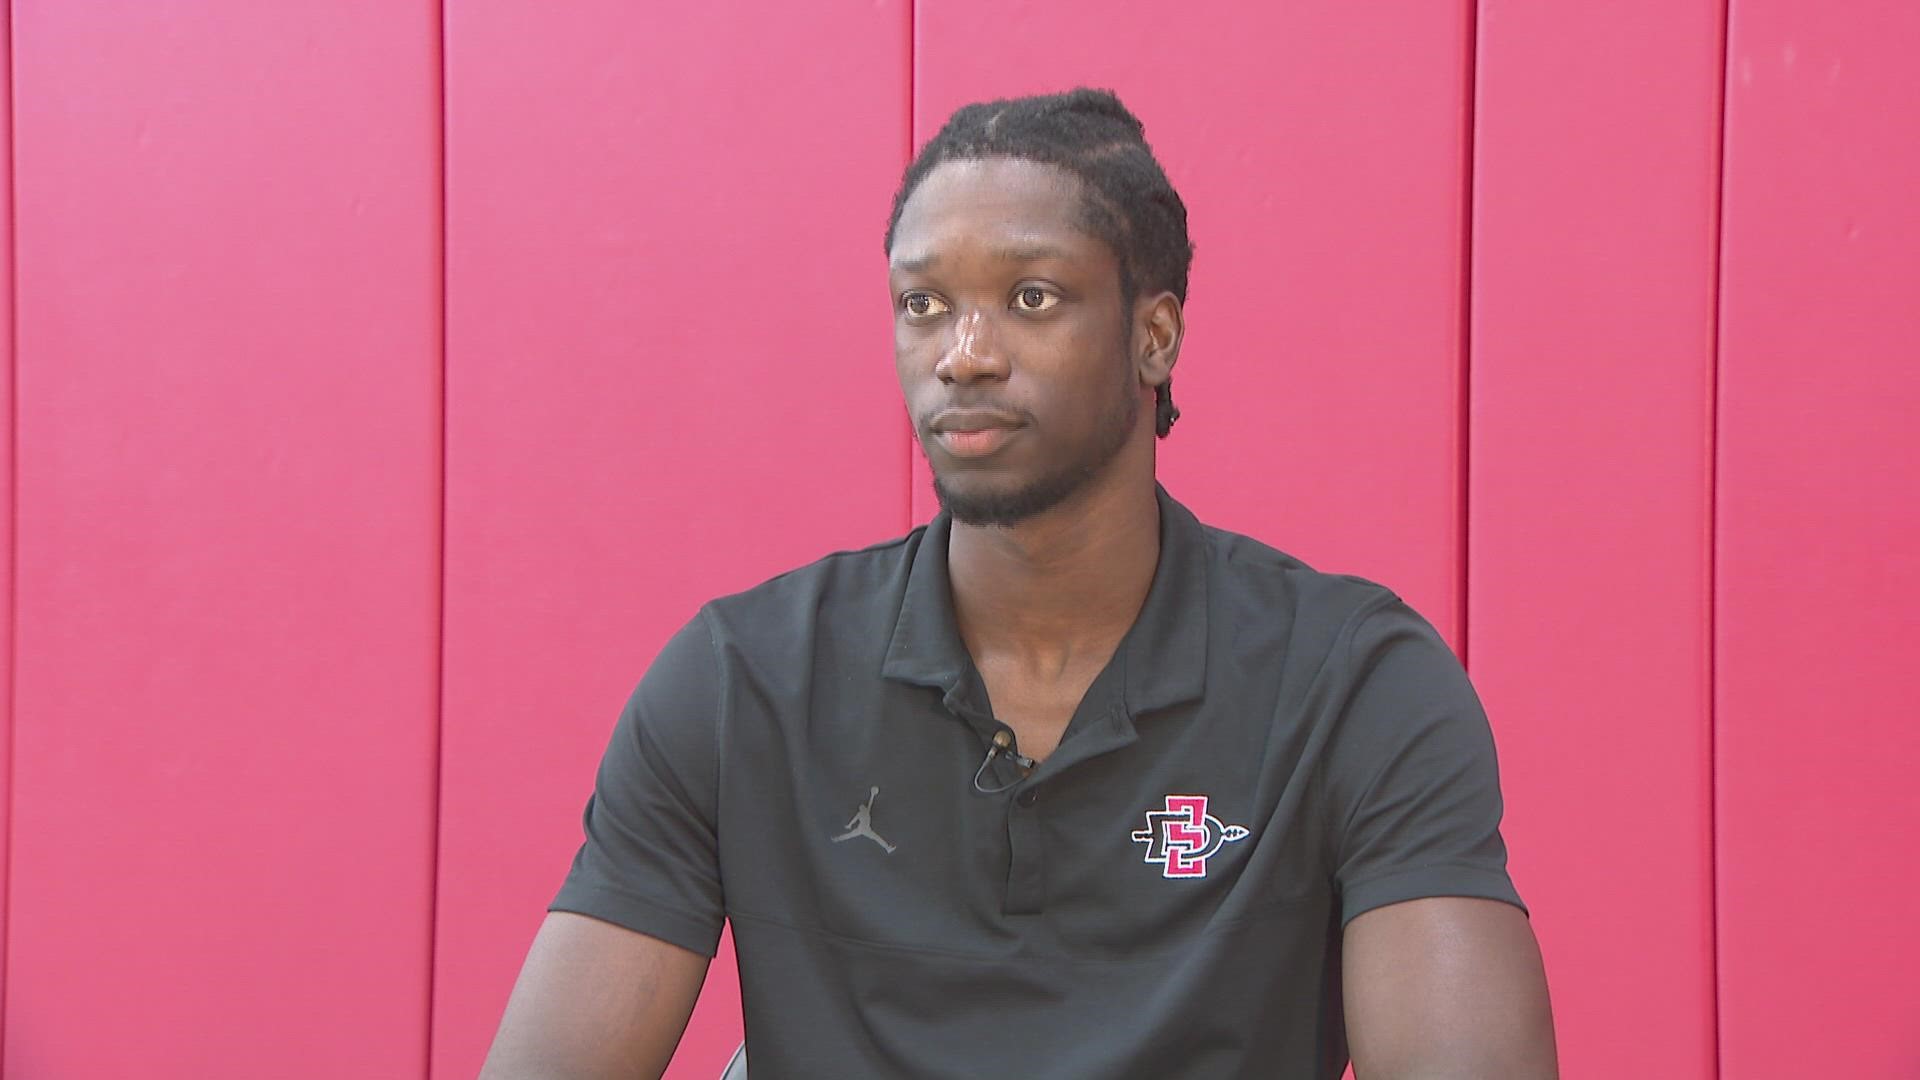 Interview with Mensah, the senior forward from Ghana before the 2022/23 season begins for San Diego State Aztecs Men's Basketball.